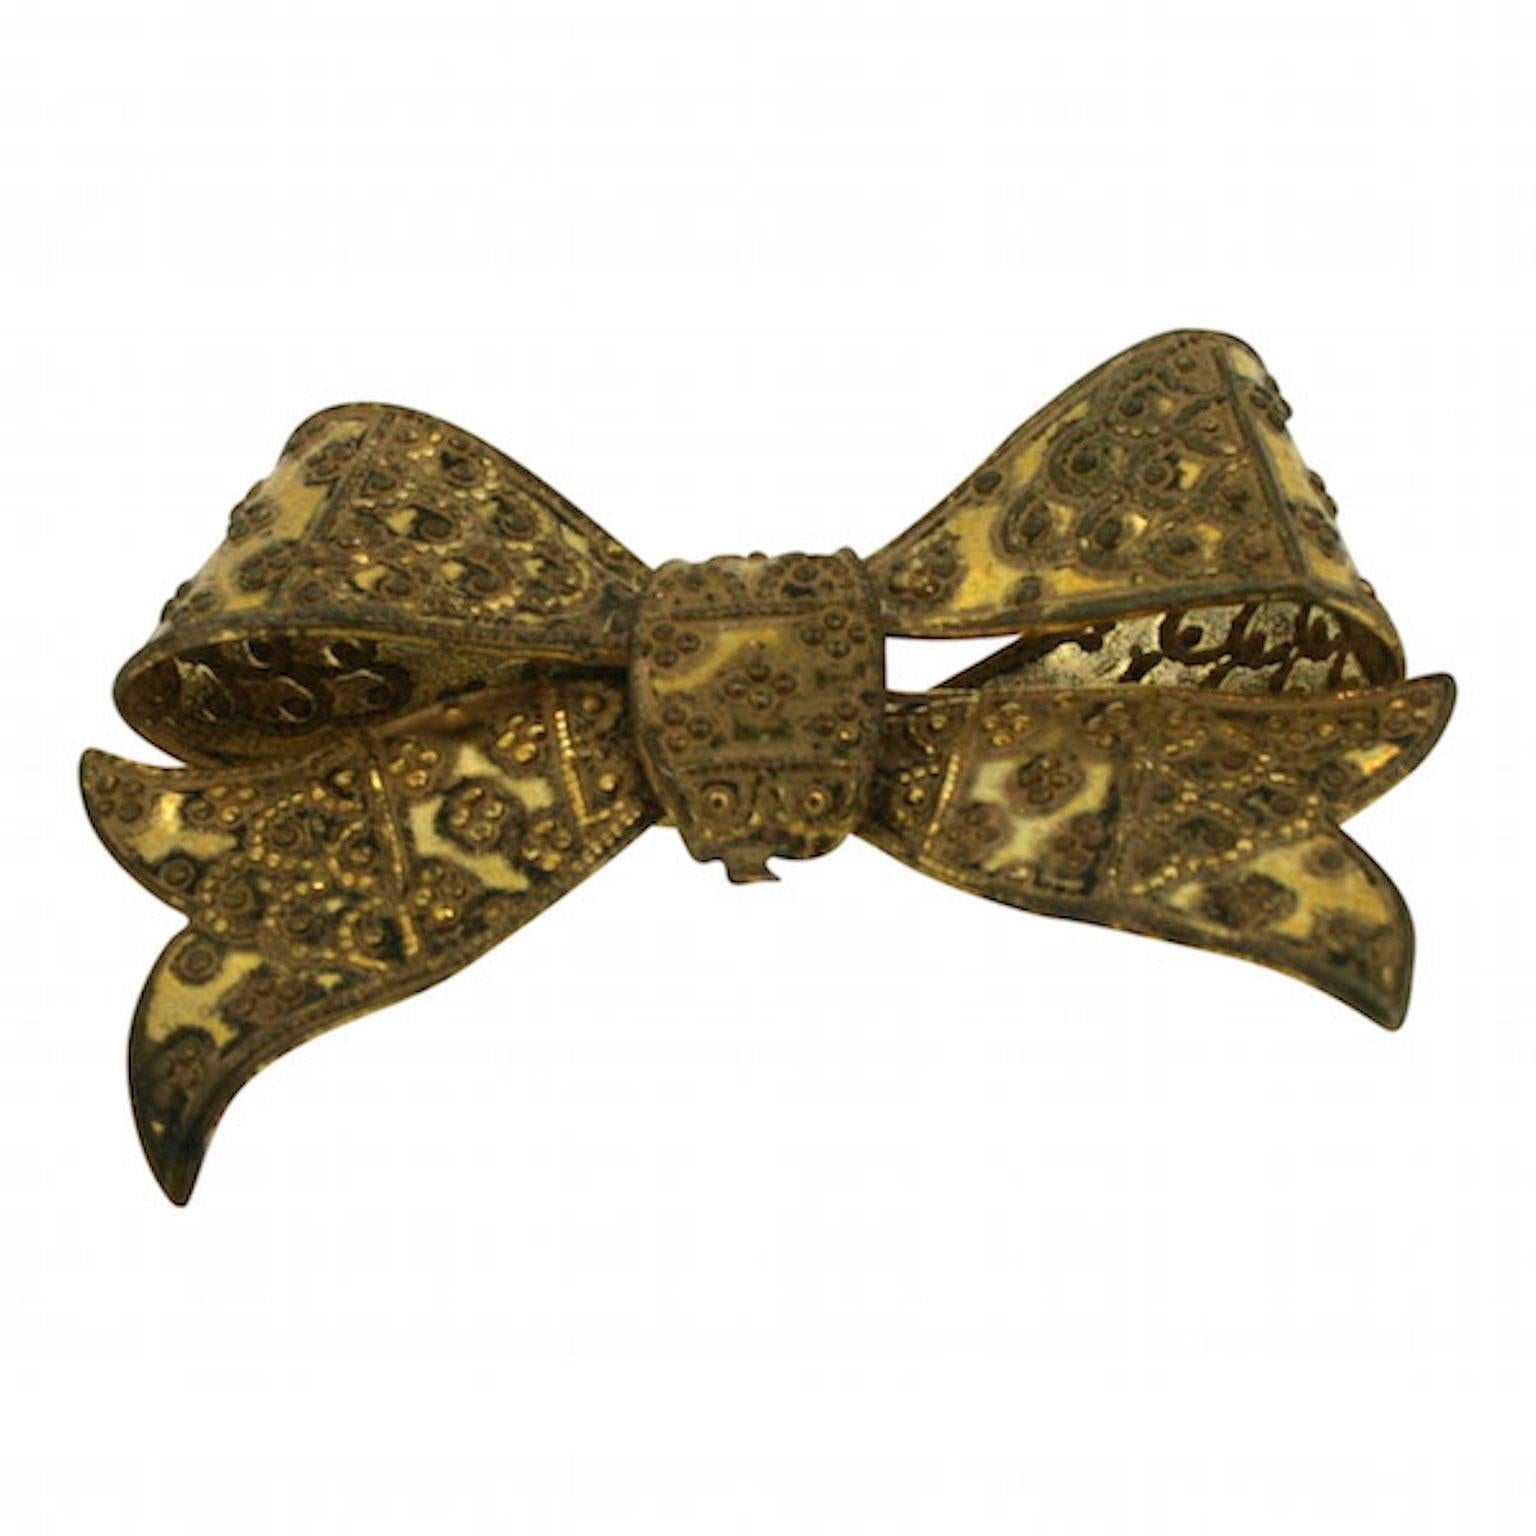 This brooch is a lovely example of the costume jewellery produced in the 1940s by the Miriam Haskell company. 

Condition Report:
Very Good - Some wear to the gilt metal surface consistent with age and use. This is only visible upon close inspection